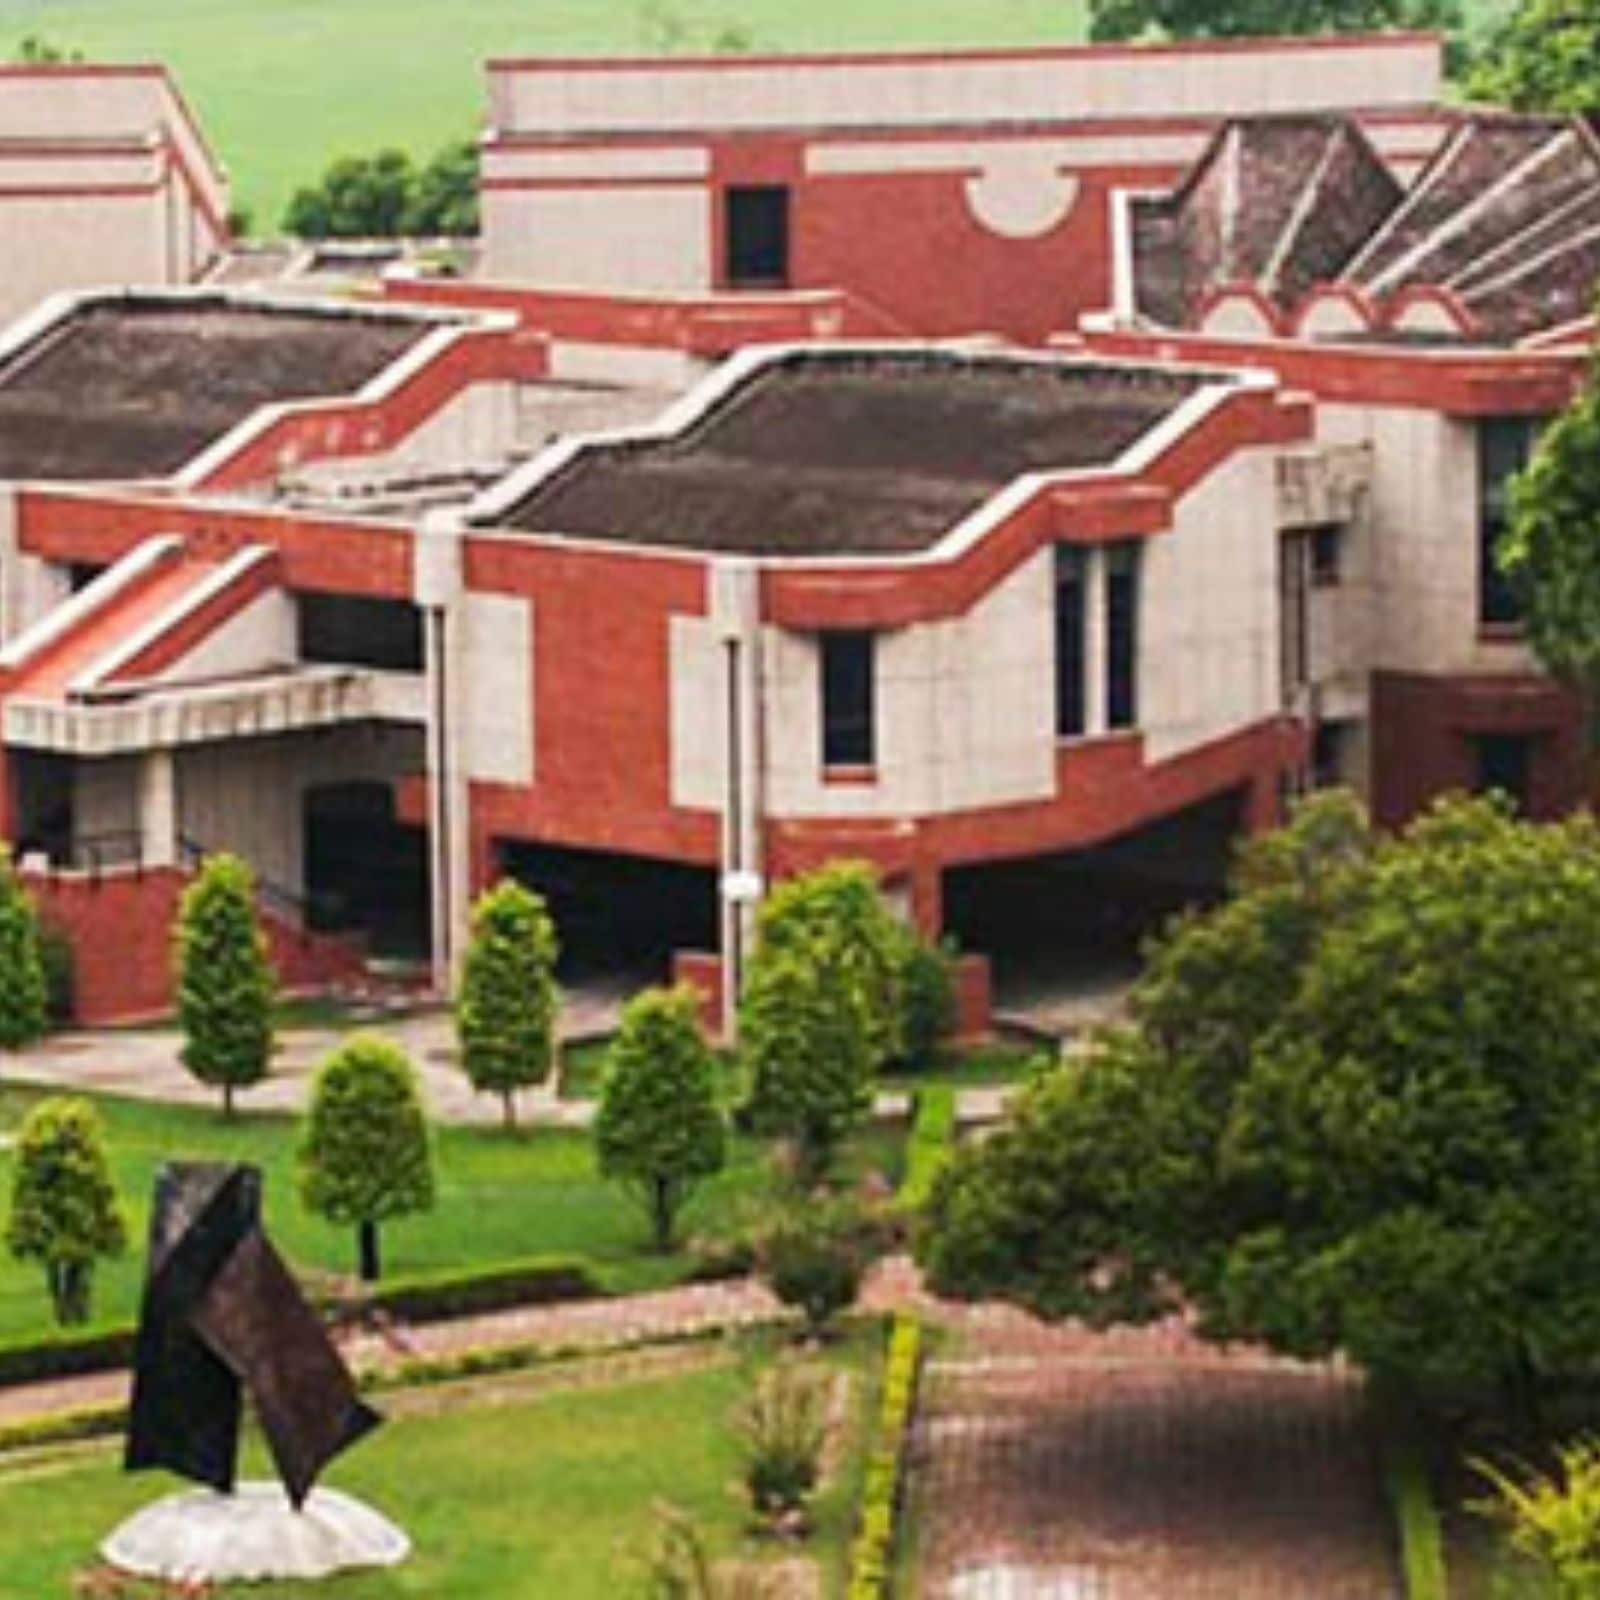 This eMasters Degree from IIT Kanpur can give your career a fresh